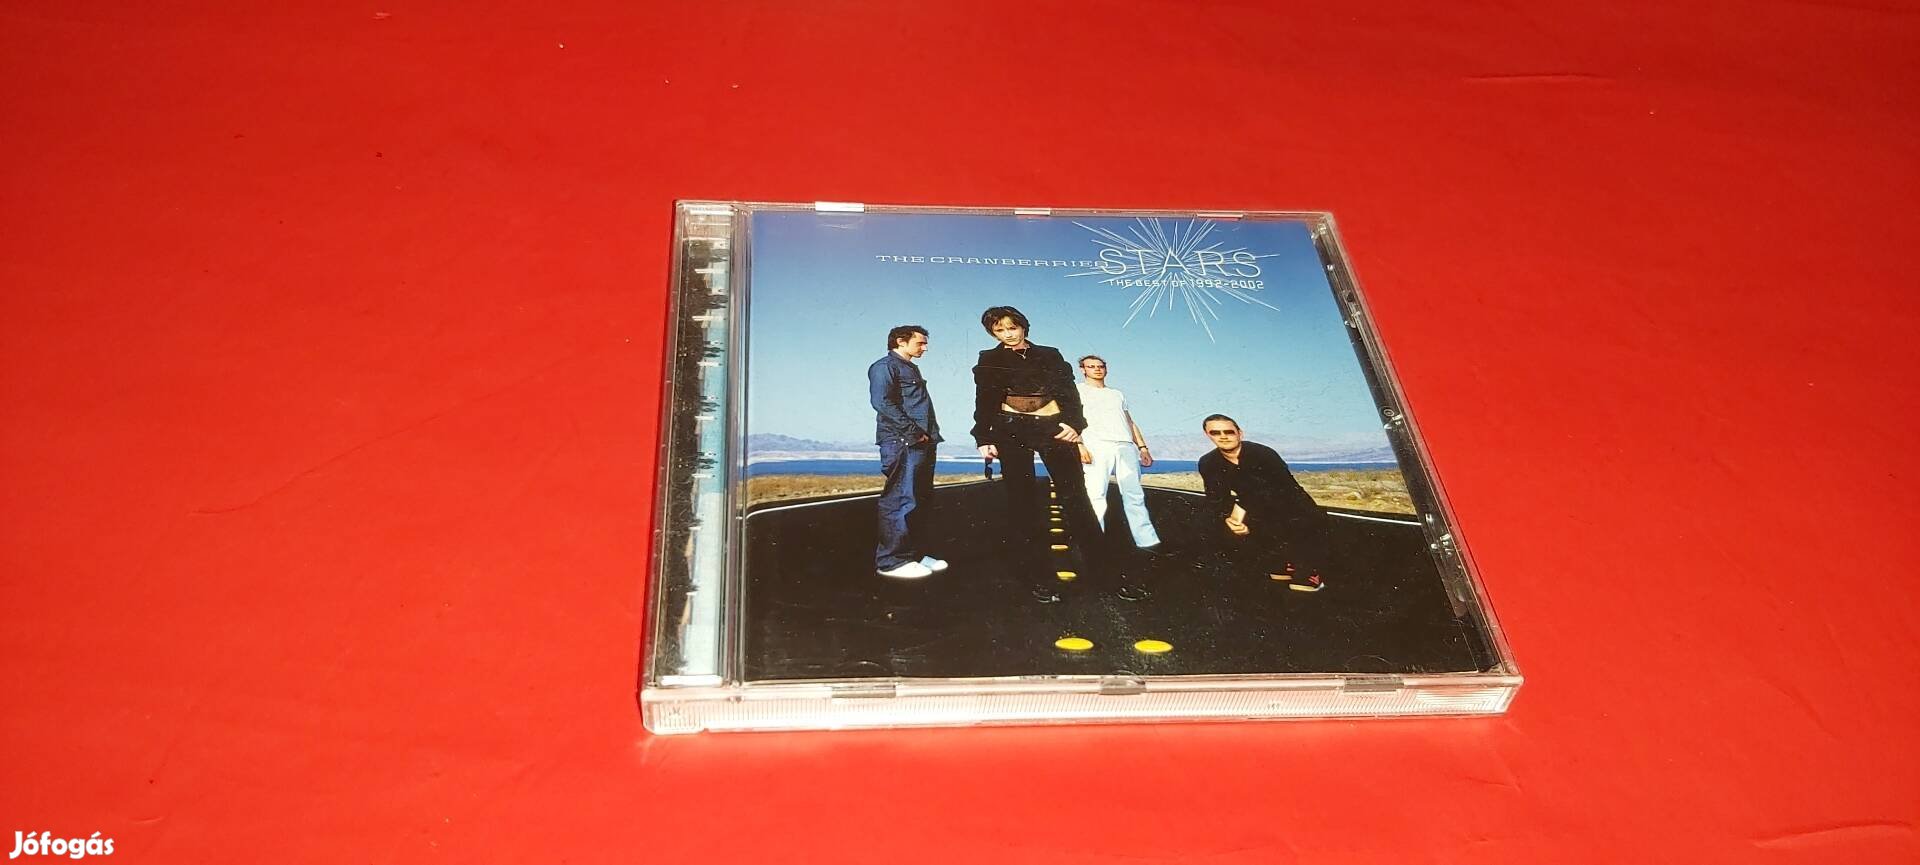 The Cranberries Stars The best of 1992-2002 Cd